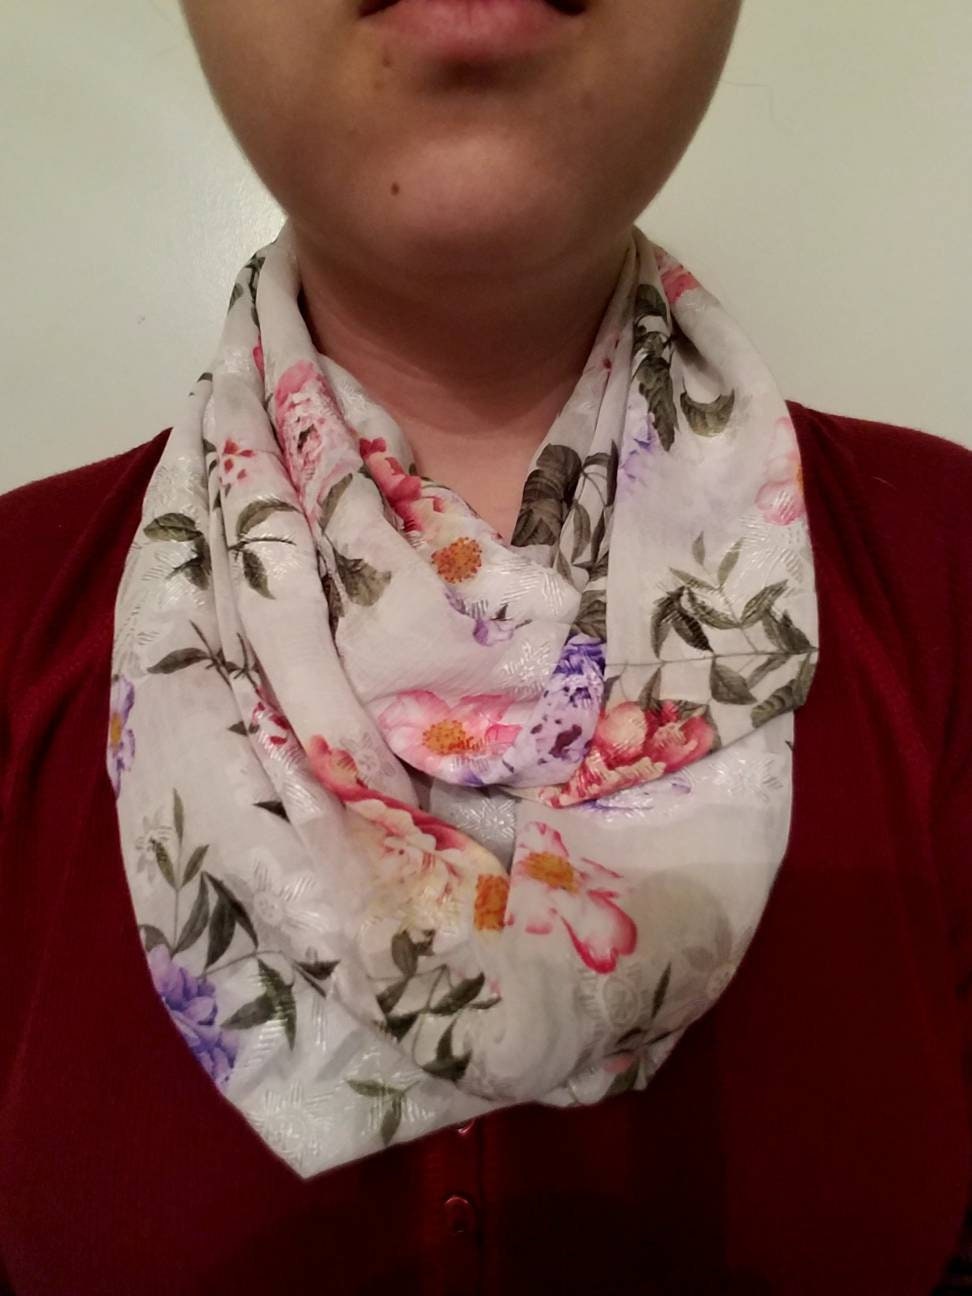 Silk Infinity Scarf, Silk Cowl Scarf, Floral Scarf, Spring Vibes, Gift for Her - Harlow's Store and Garden Gifts